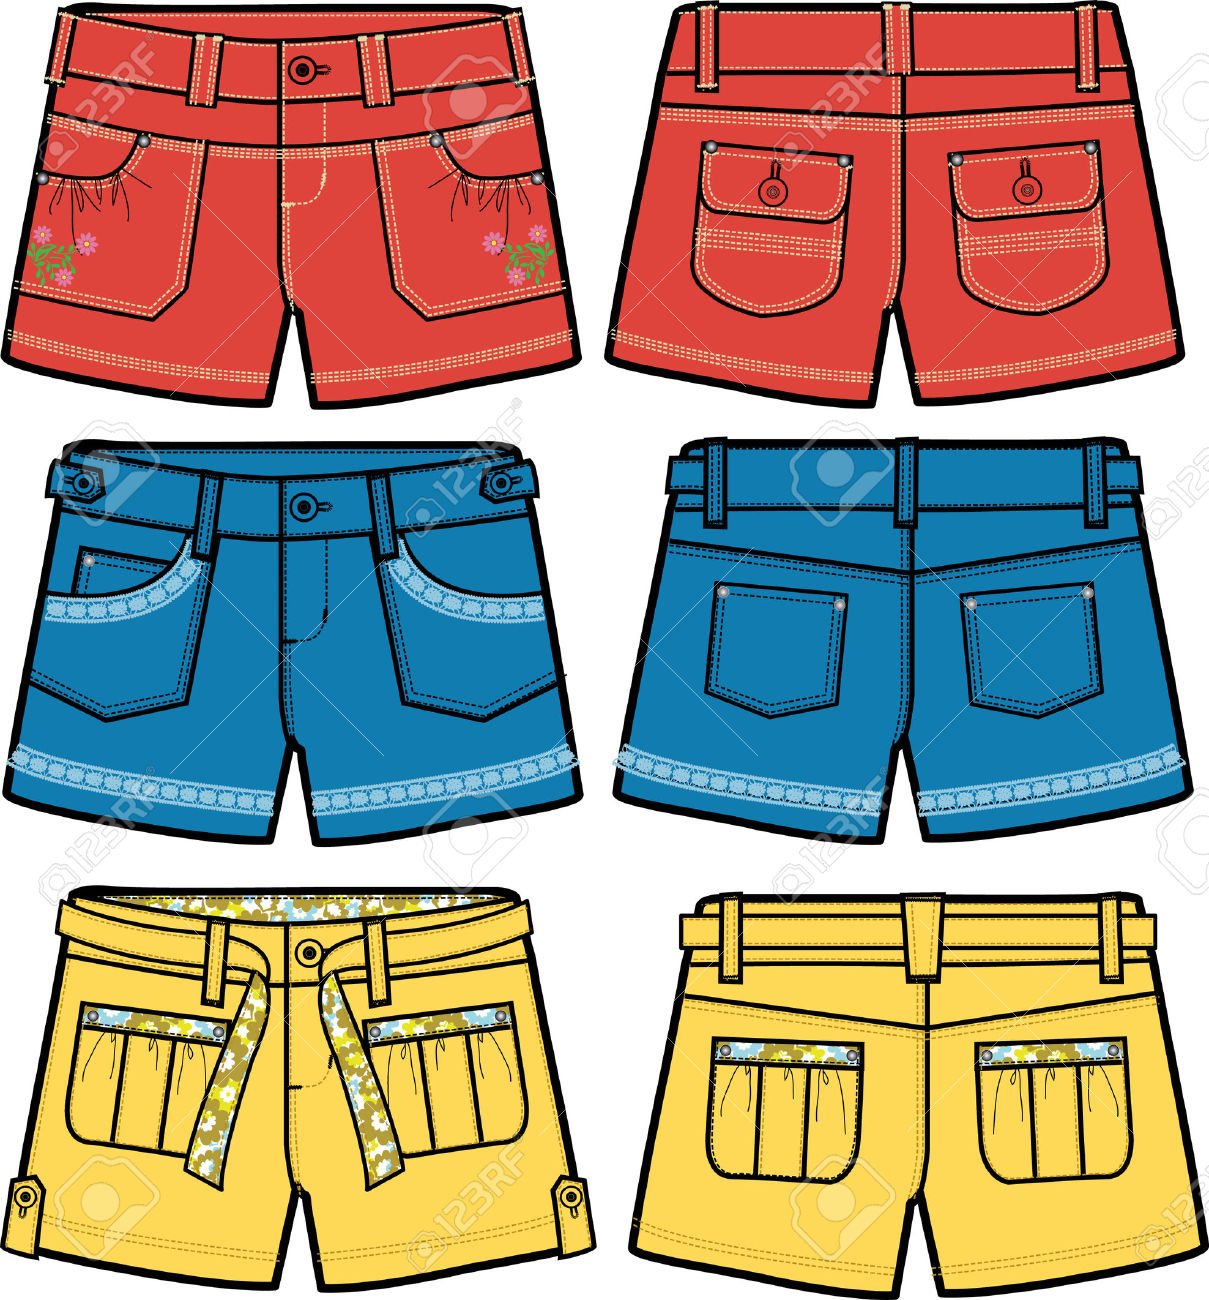 Shorts clipart - Clipground